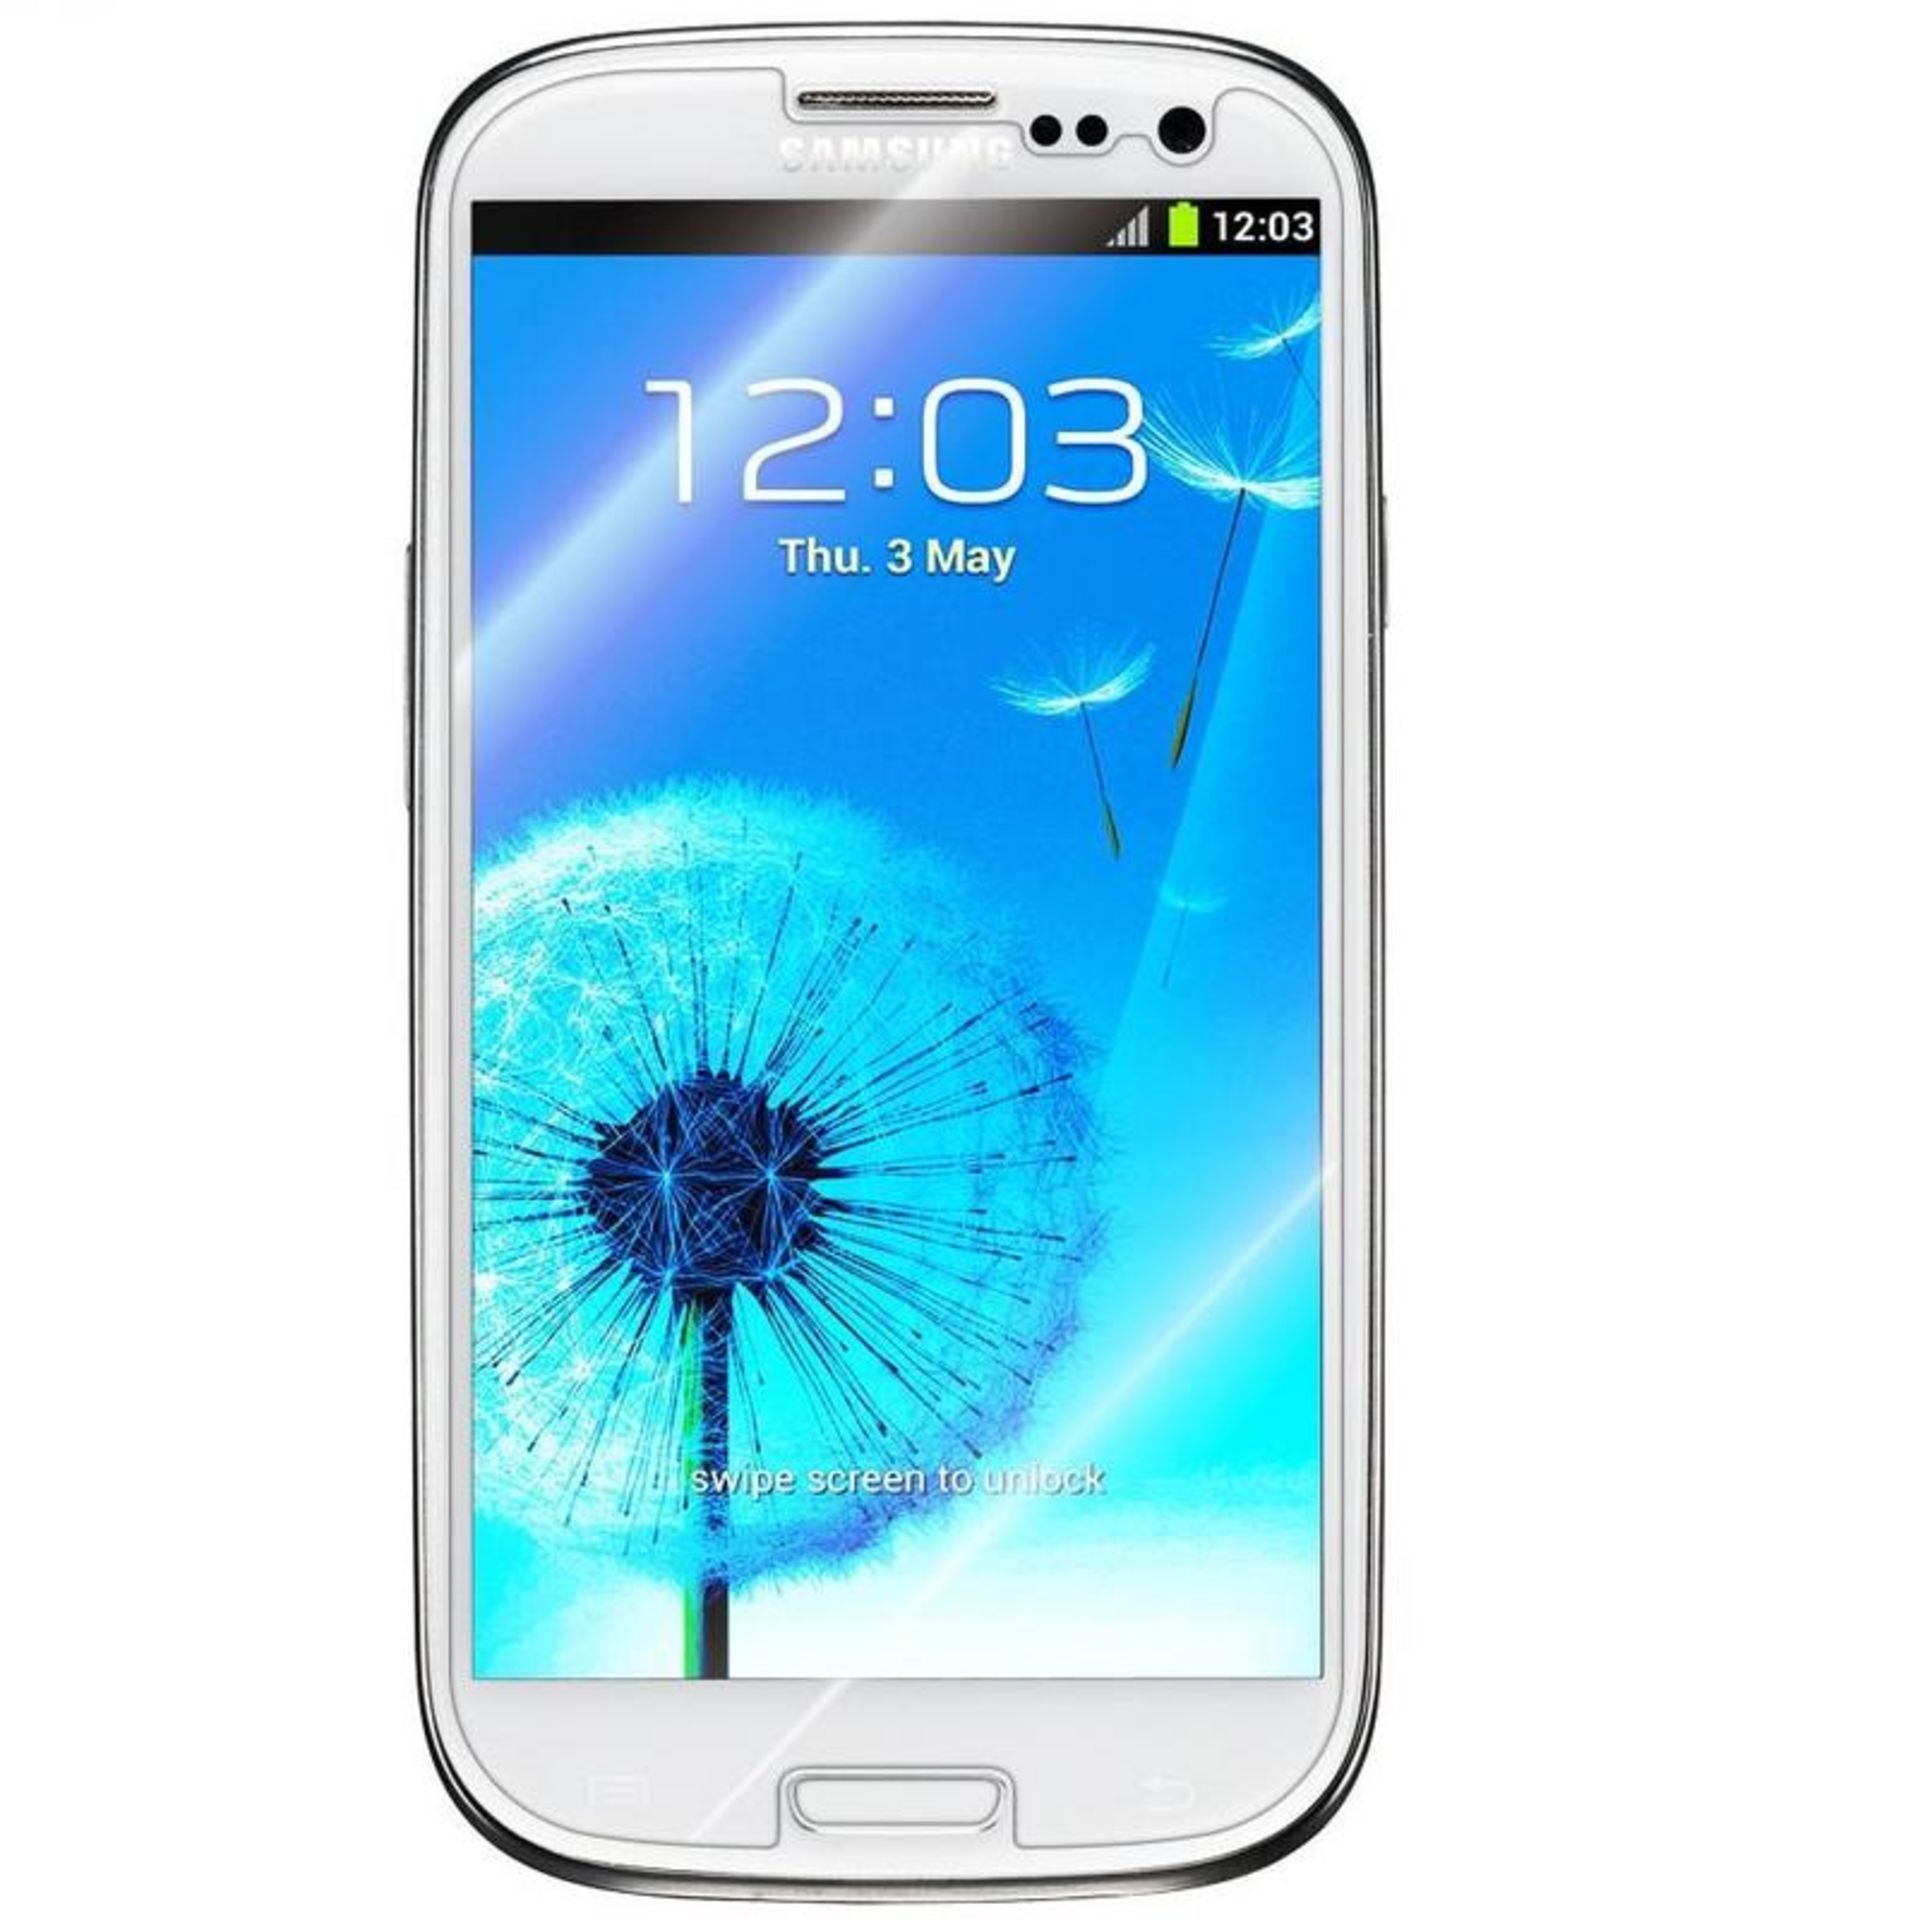 No VAT Grade A Samsung S3(i9300) Colours May Vary Item available approx 15 working days after sale